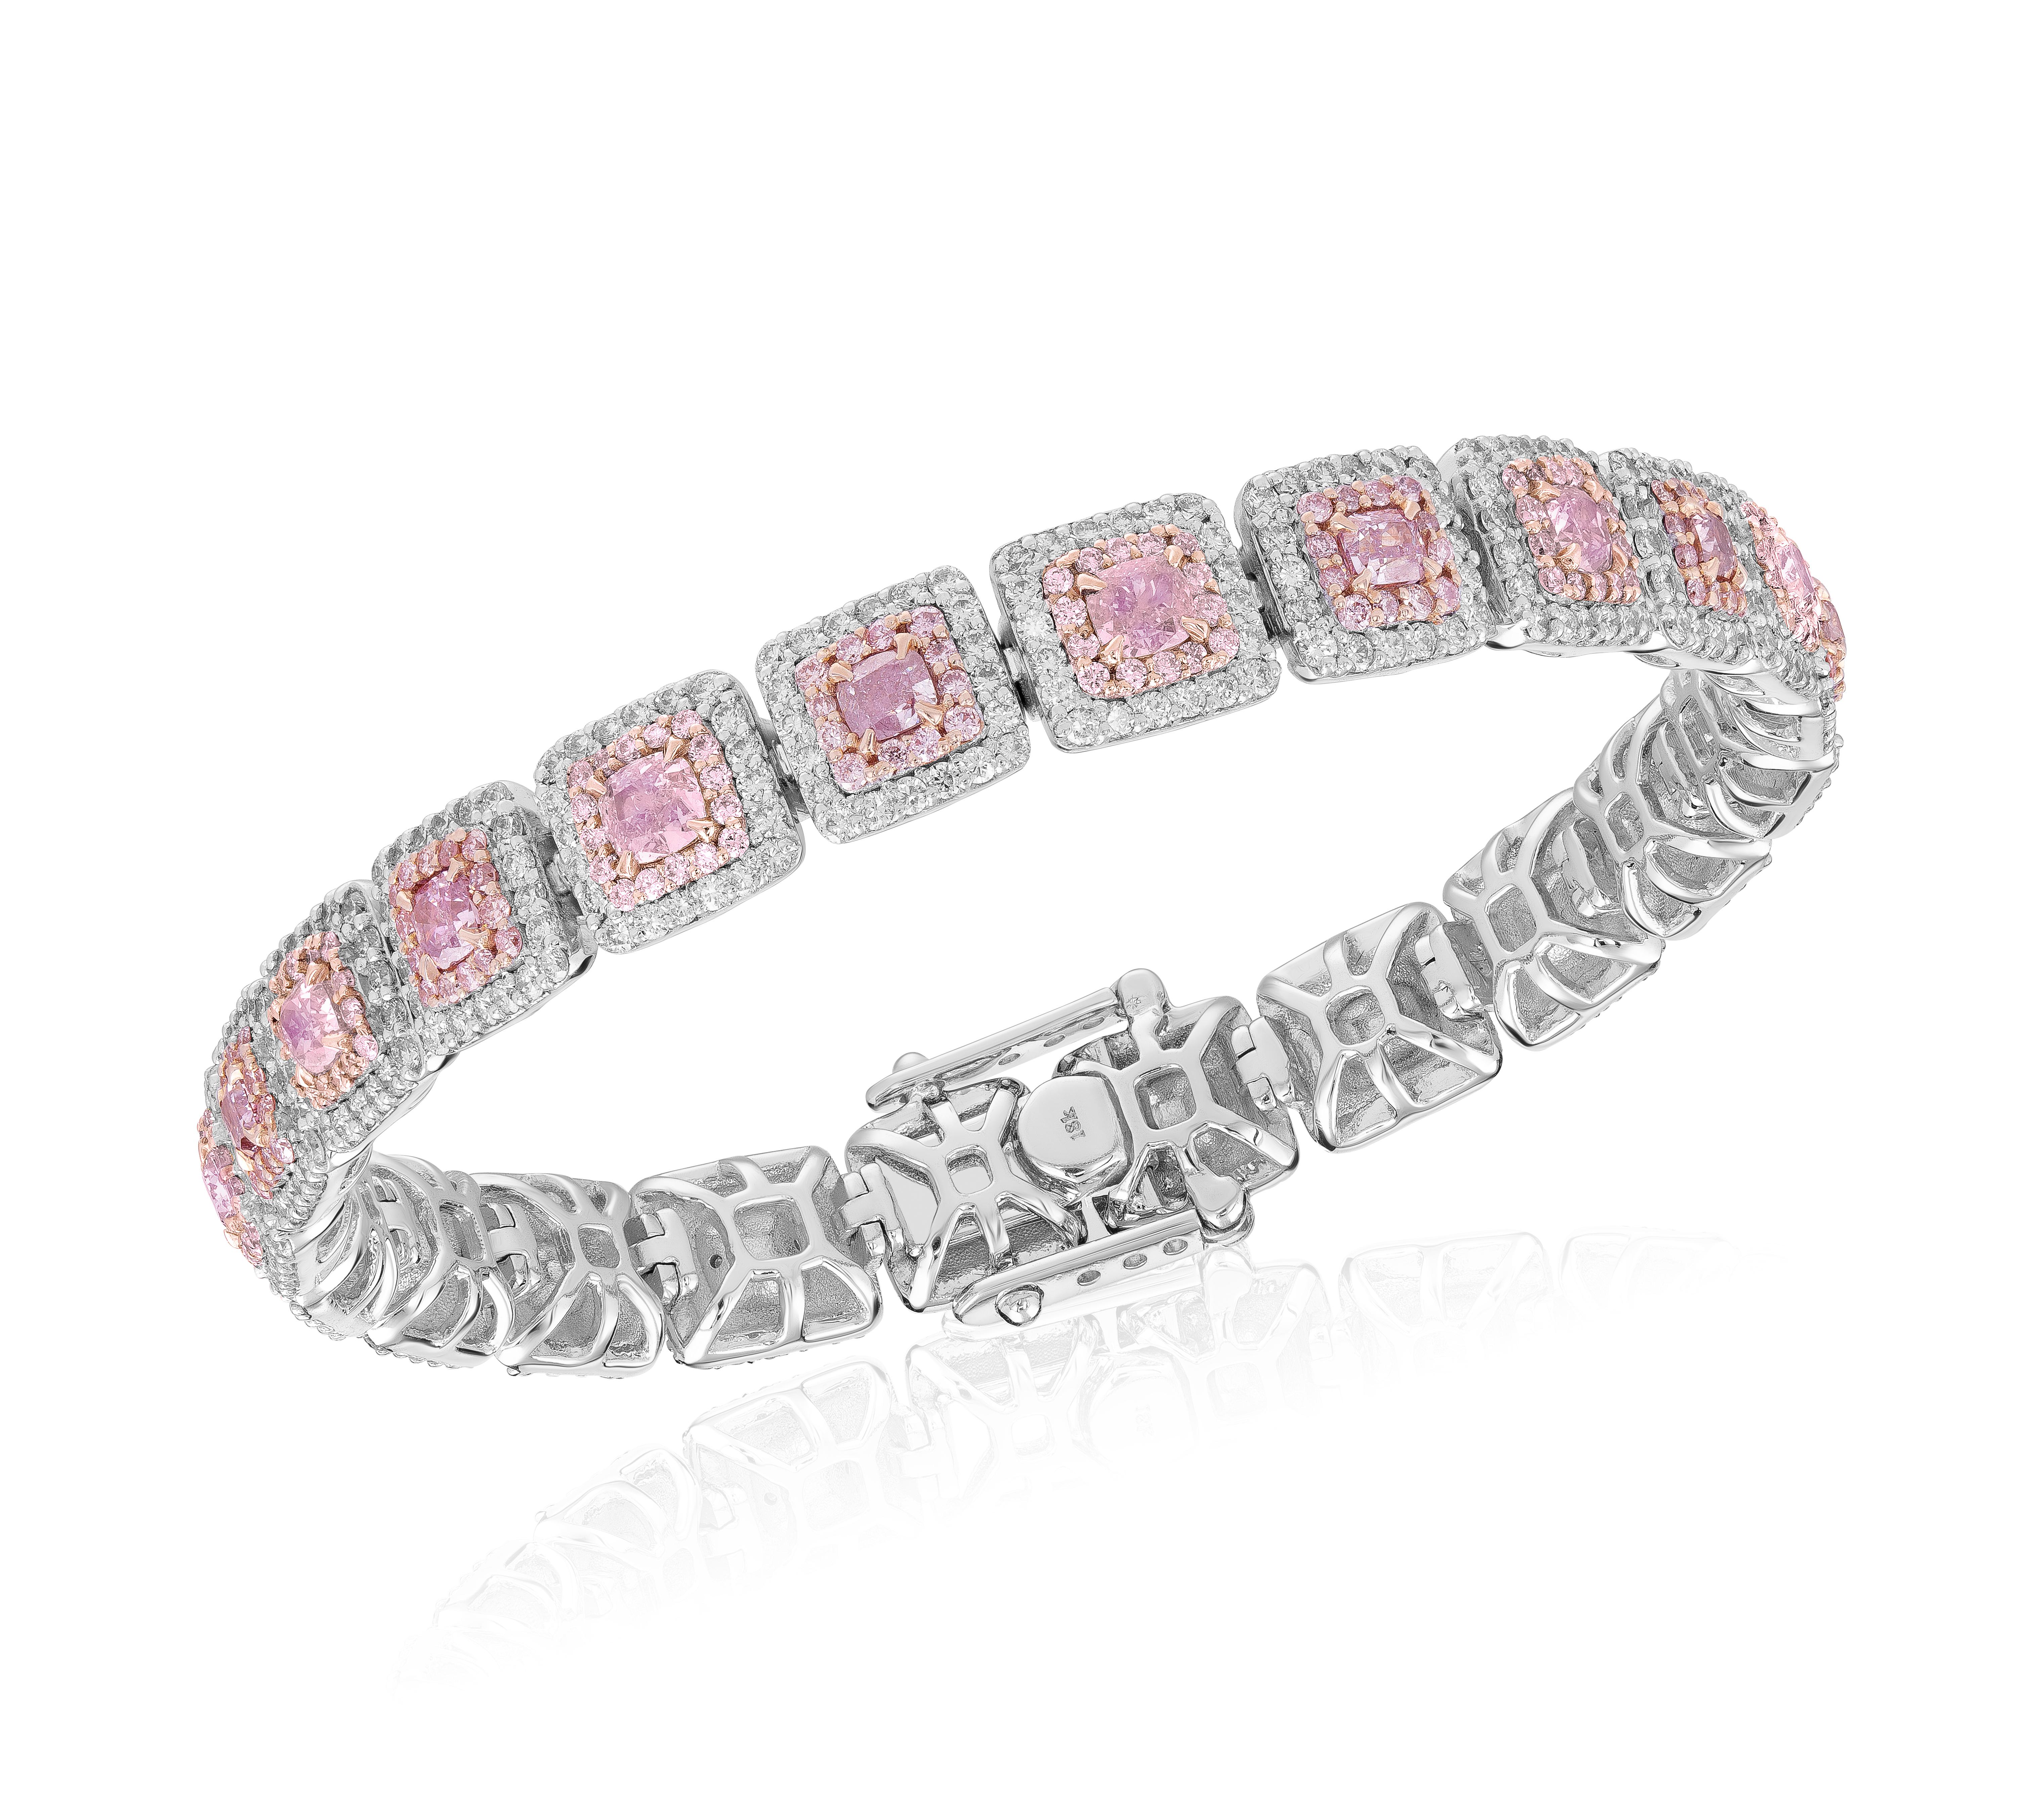 Introducing our stunning pink diamond bracelet, featuring 23 center diamonds with a total weight of 1.78 carats. Each exquisite pink diamond is accompanied by 236 pink melee diamonds weighing 1.44 carats and 413 white diamond melee weighing 3.28